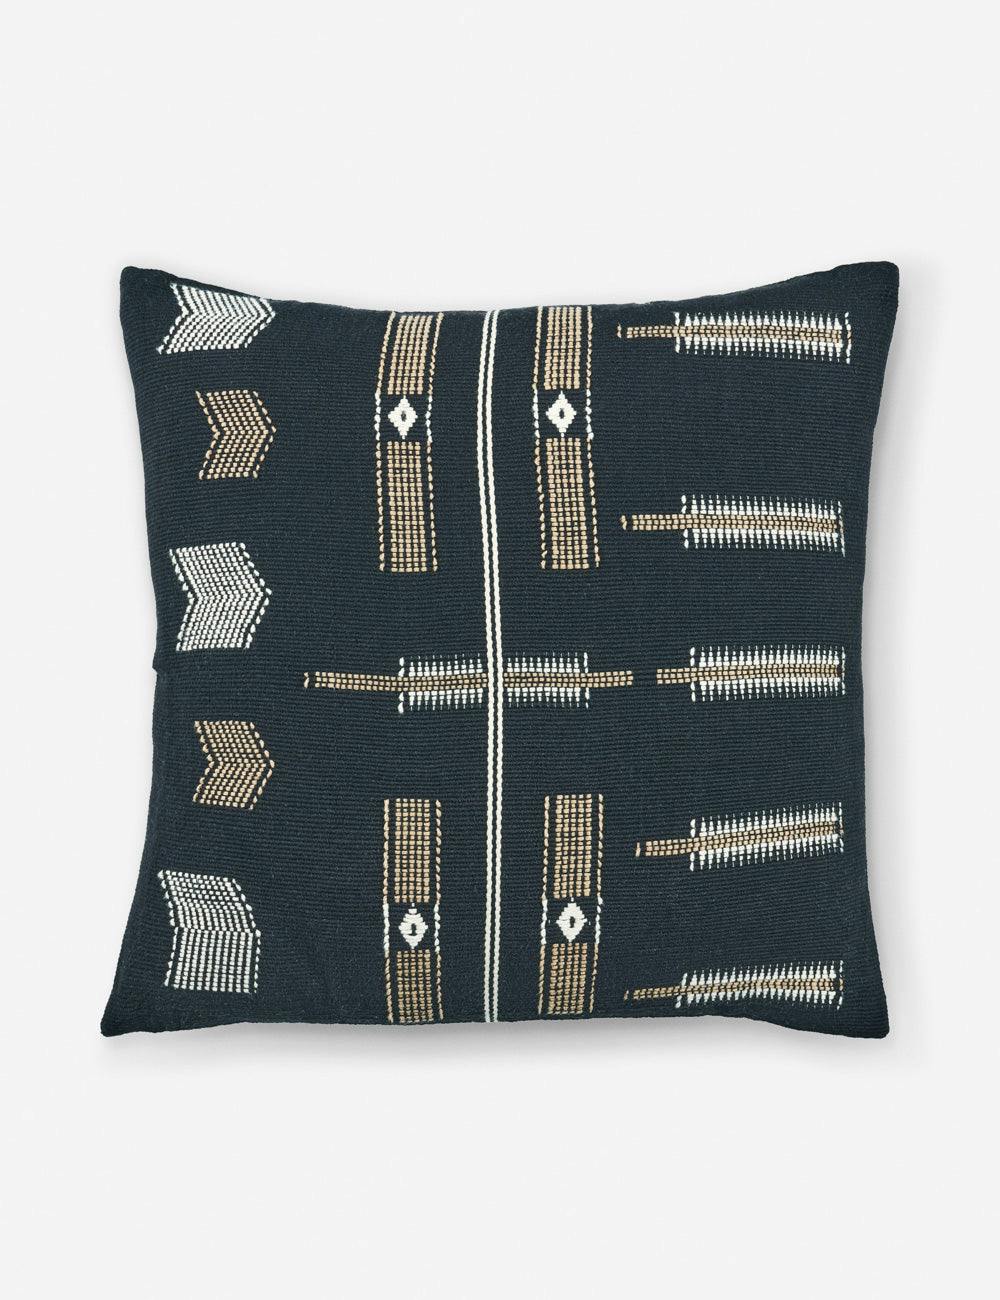 Nagaland Artisan Embroidered 18" Square Throw Pillow in Black and Tan